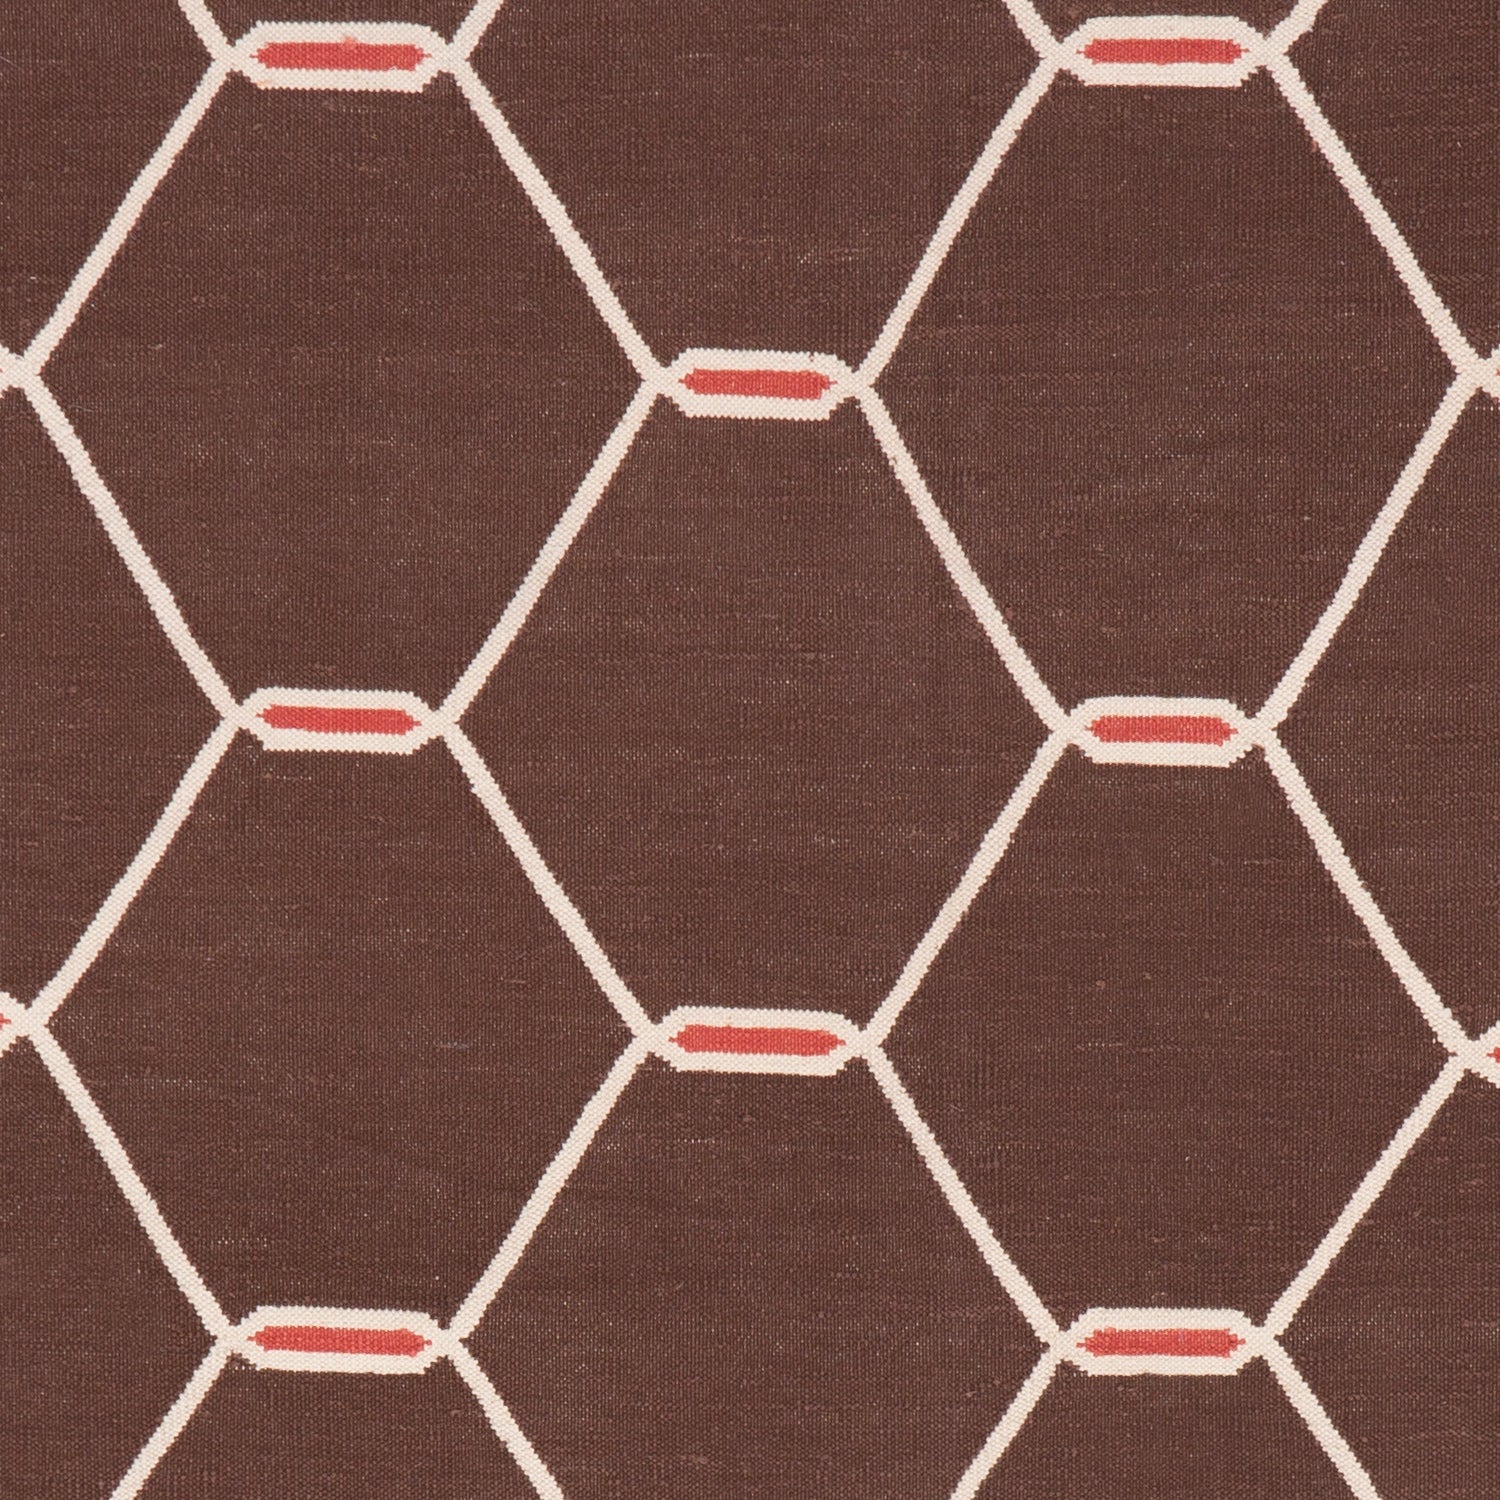 Geometric patterned fabric with hexagons and molecular structure influence.